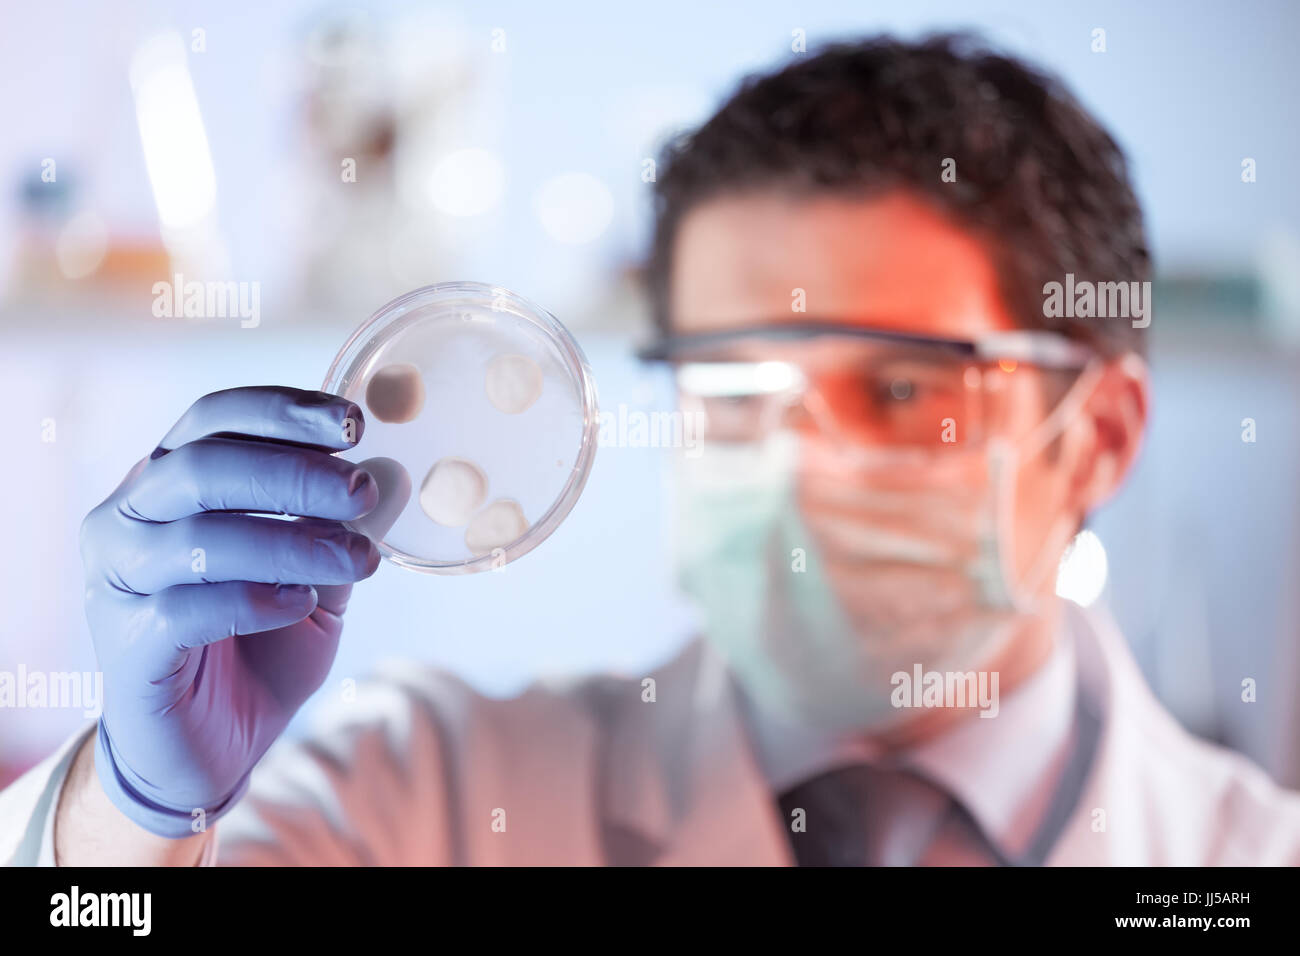 Life science researcher observing cells in petri dish. Stock Photo